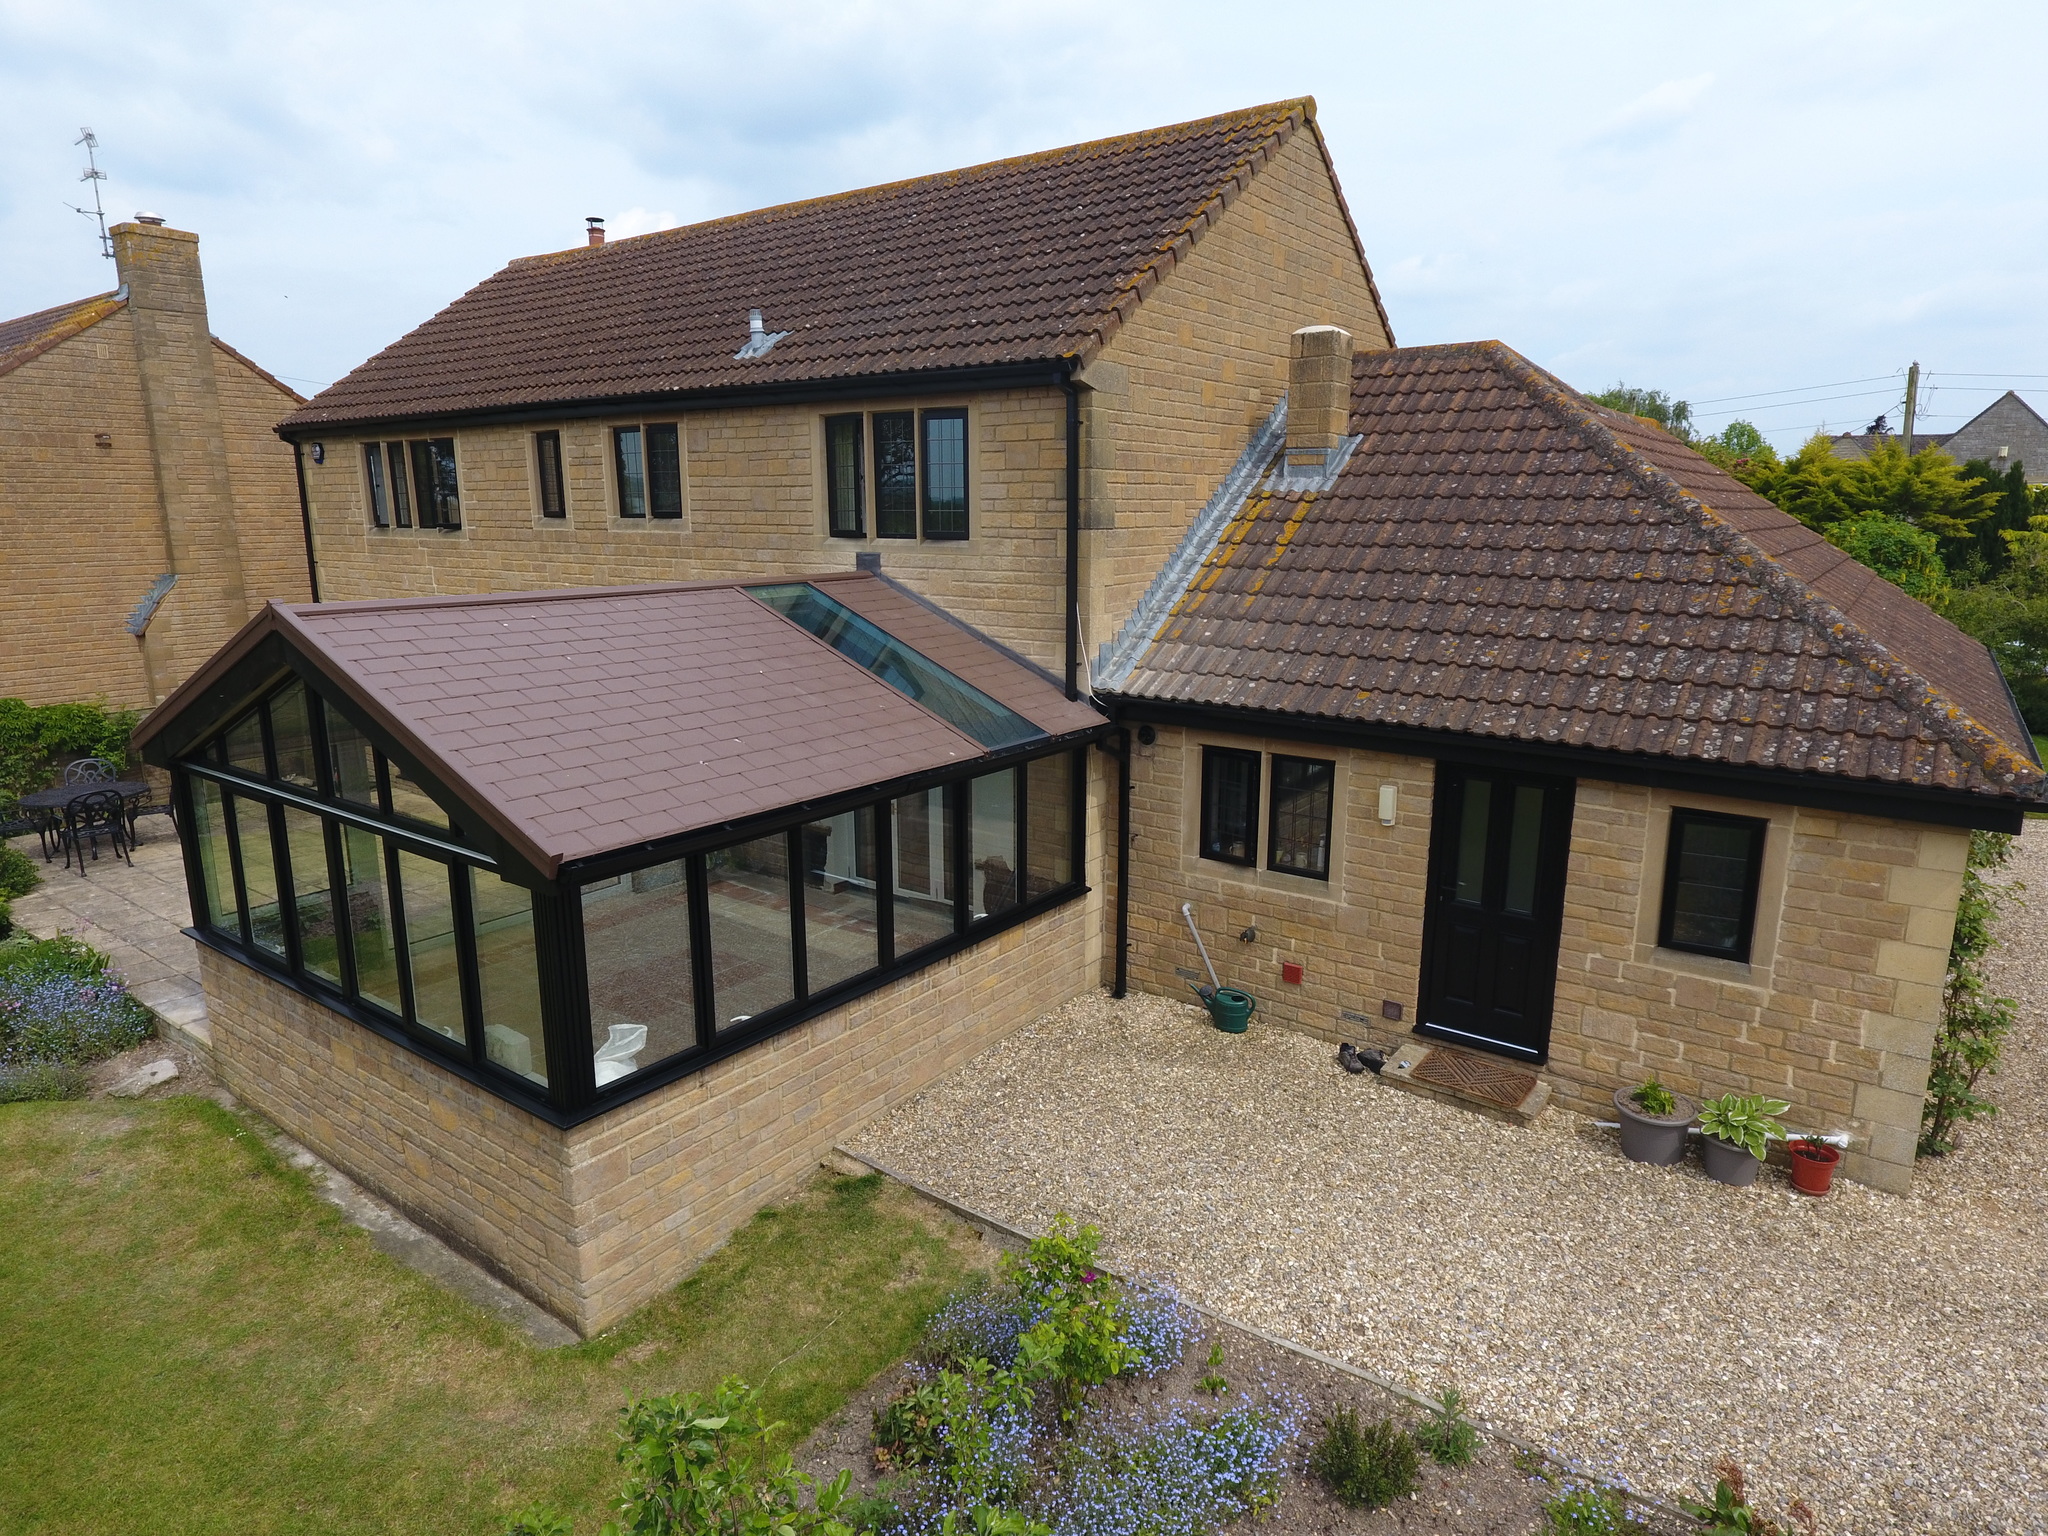 Aerial view of a stone-built house featuring a large, brown-framed conservatory with a gabled roof and glass walls. The conservatory is set in a well-kept garden with a gravel path and is complemented by the surrounding greenery and floral beds